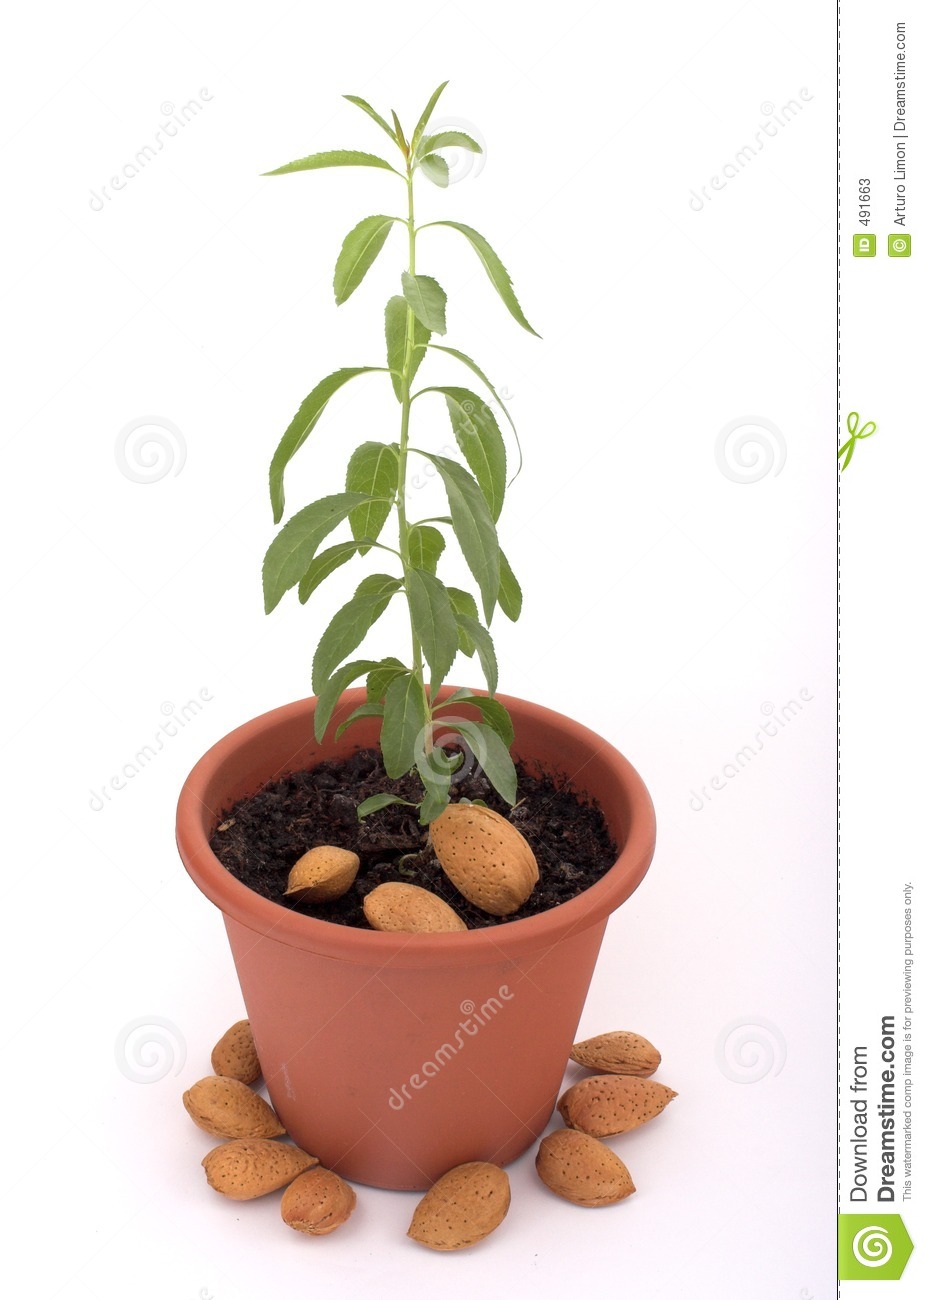 Baby Almond Tree And Almond 